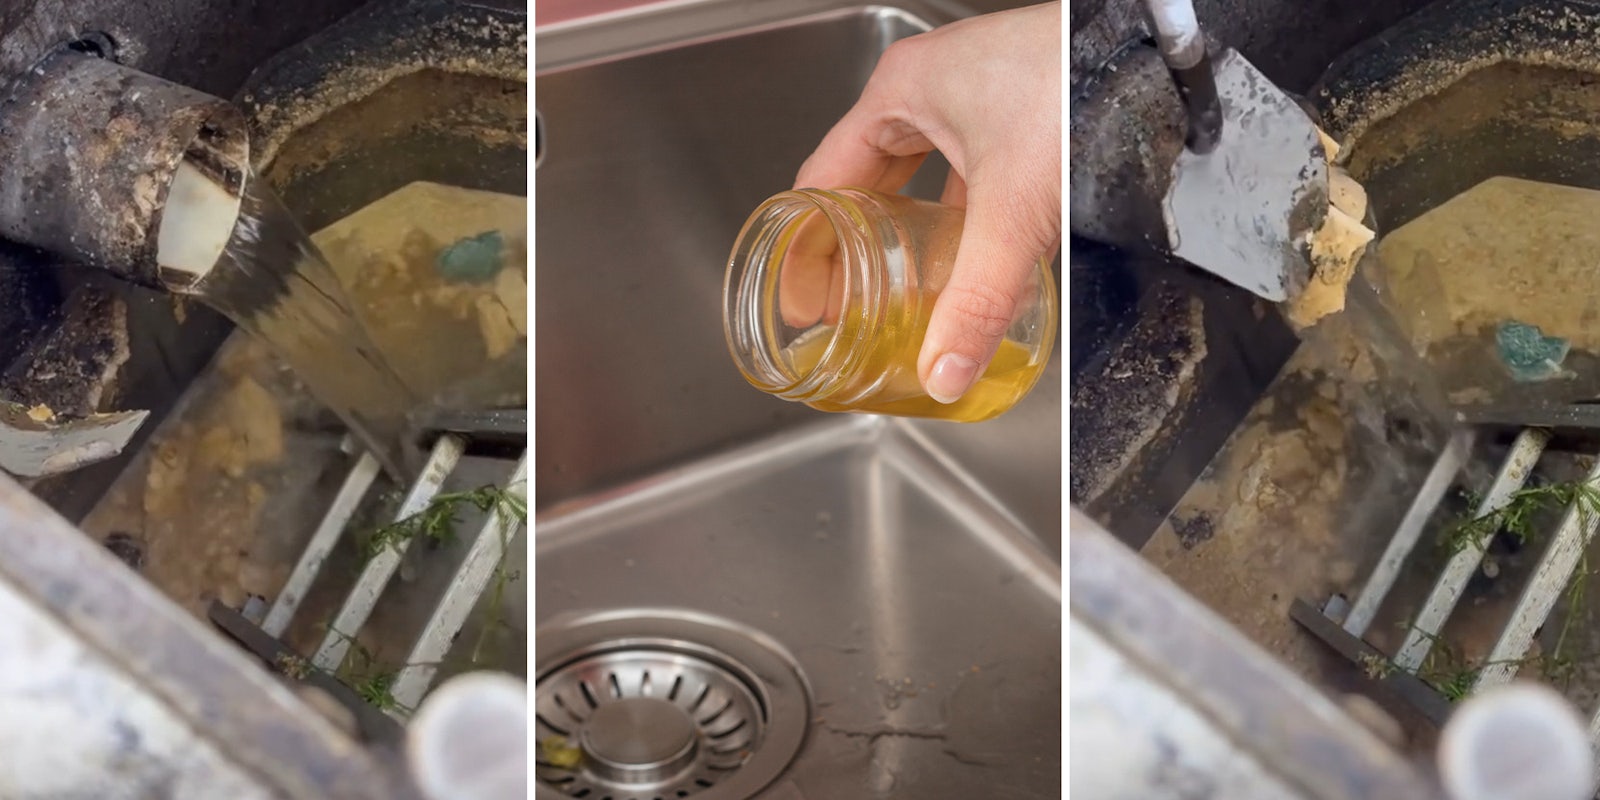 Plumber shares what you should never put down your sink